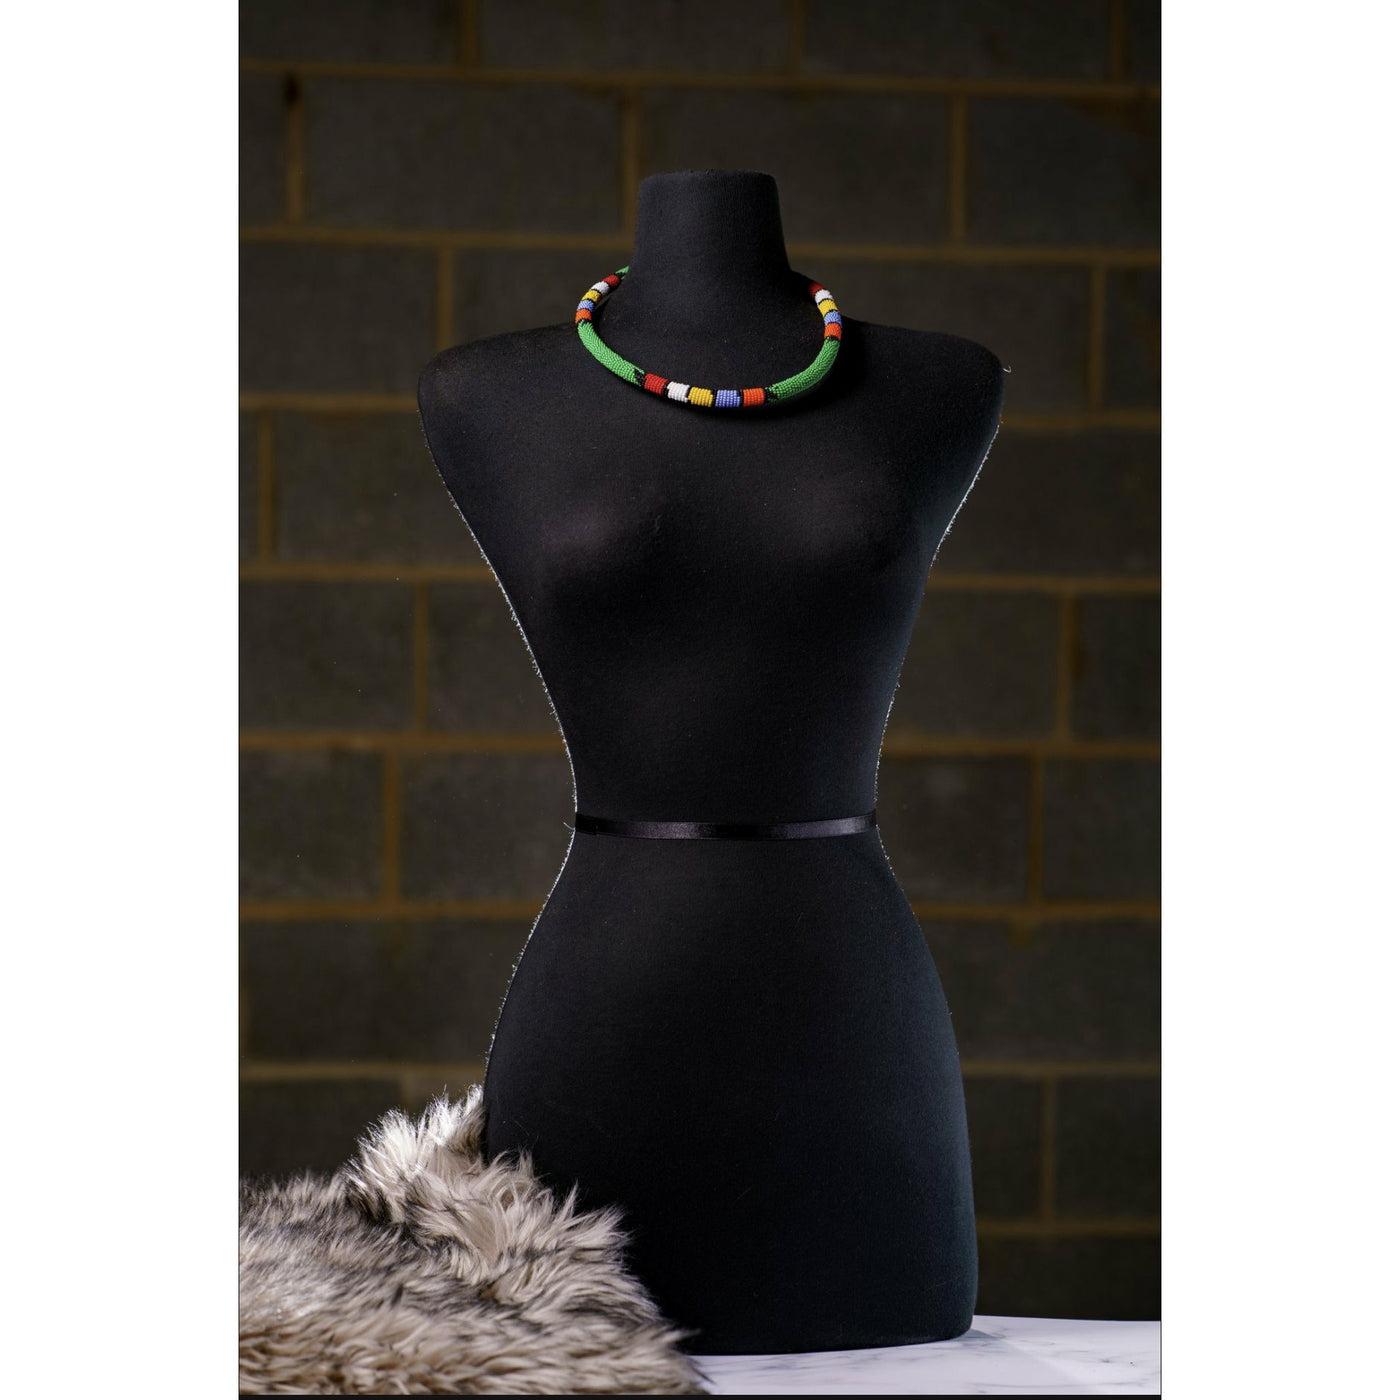 Sample: Afrop beaded single necklace